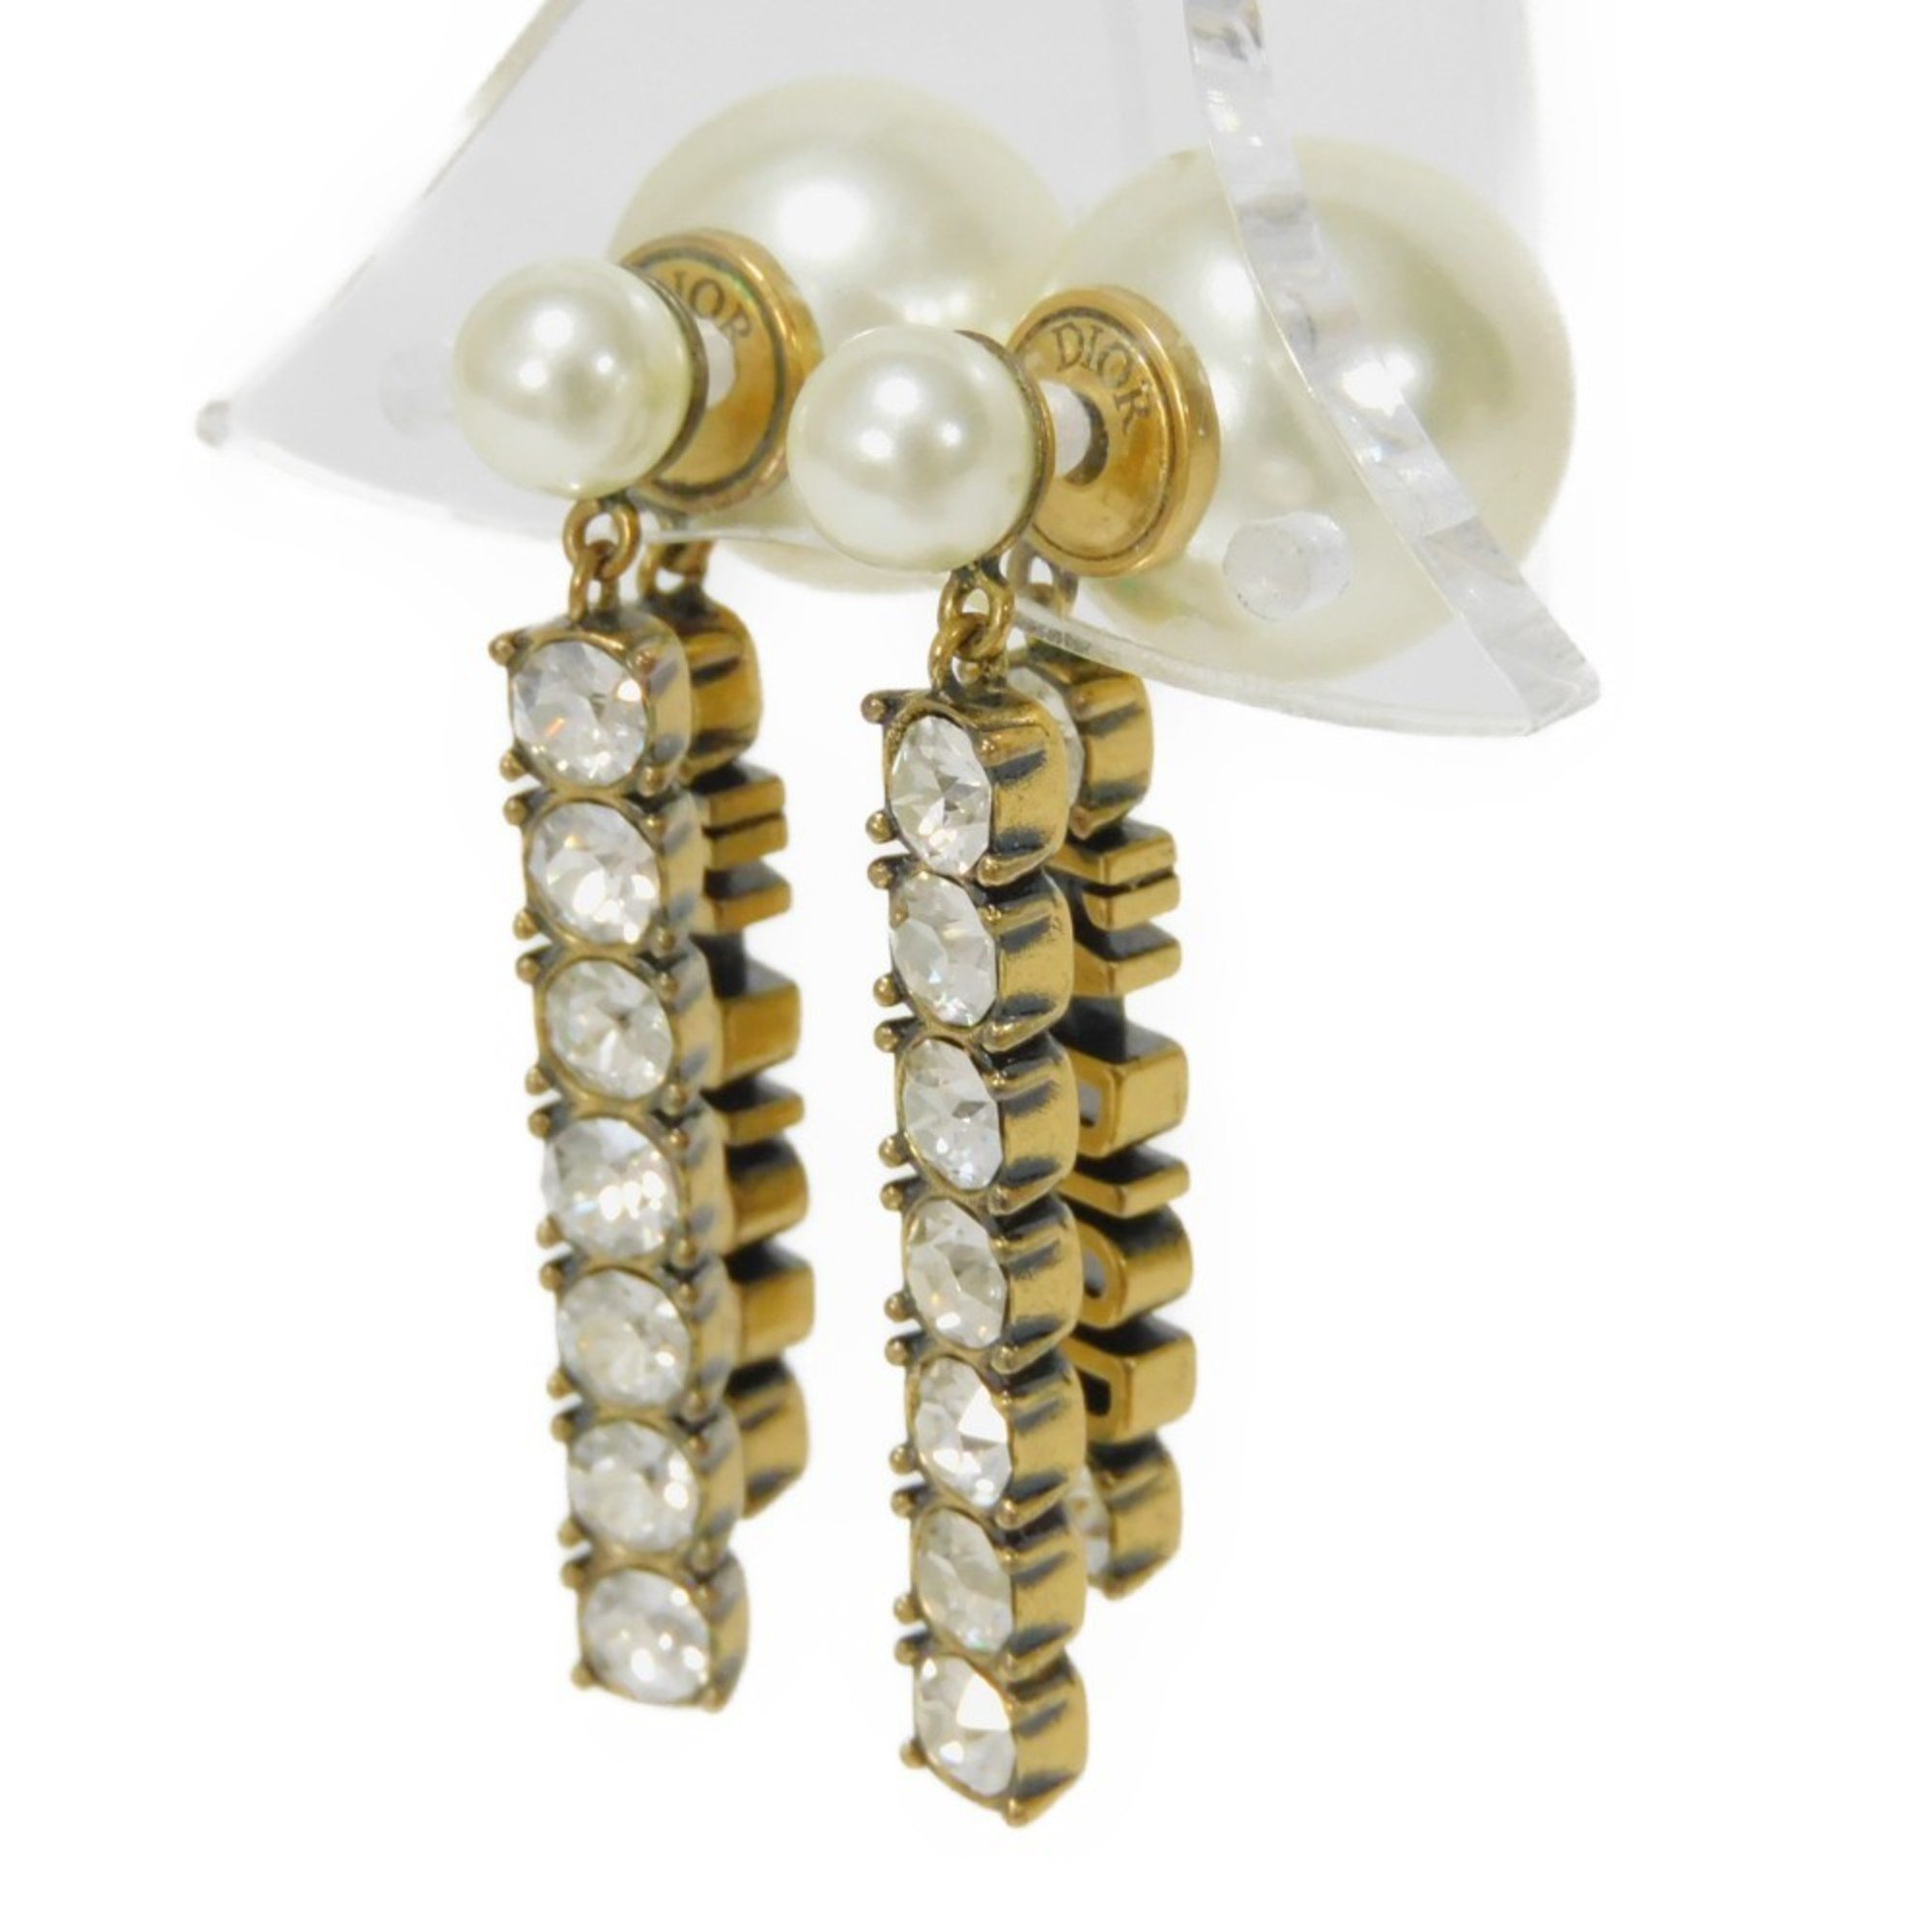 Christian Dior Dior Earrings Tribal J'ADORE Crystal Resin Pearl Stud Swing Ivory E1144TRICY_D908 Women's